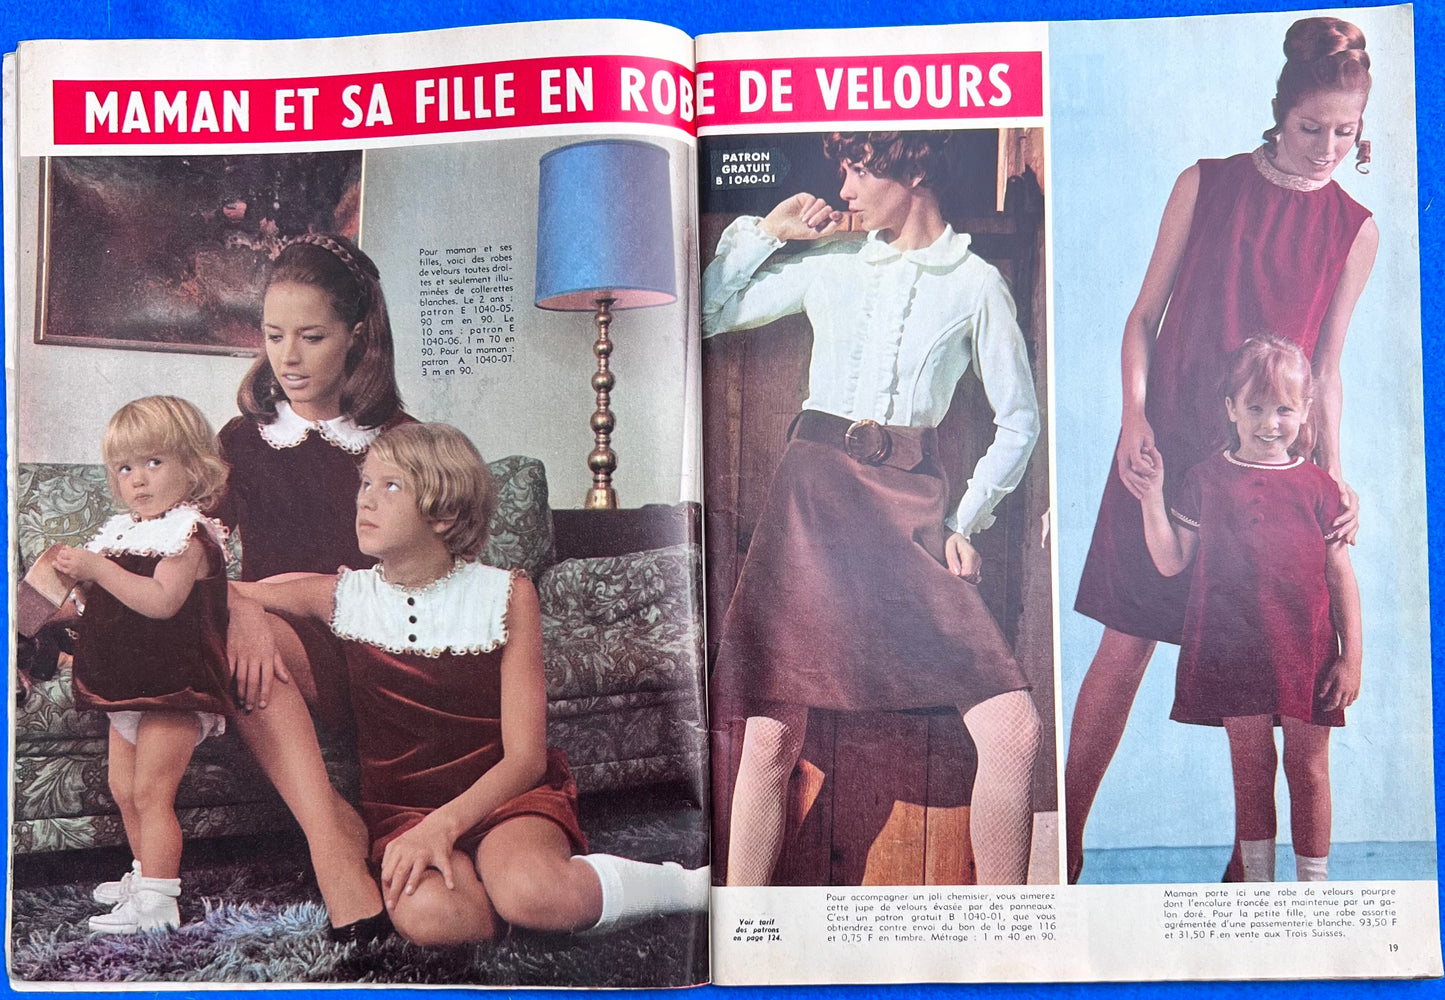 Christmas 1968  Fashions and Decor in French Modes de Paris